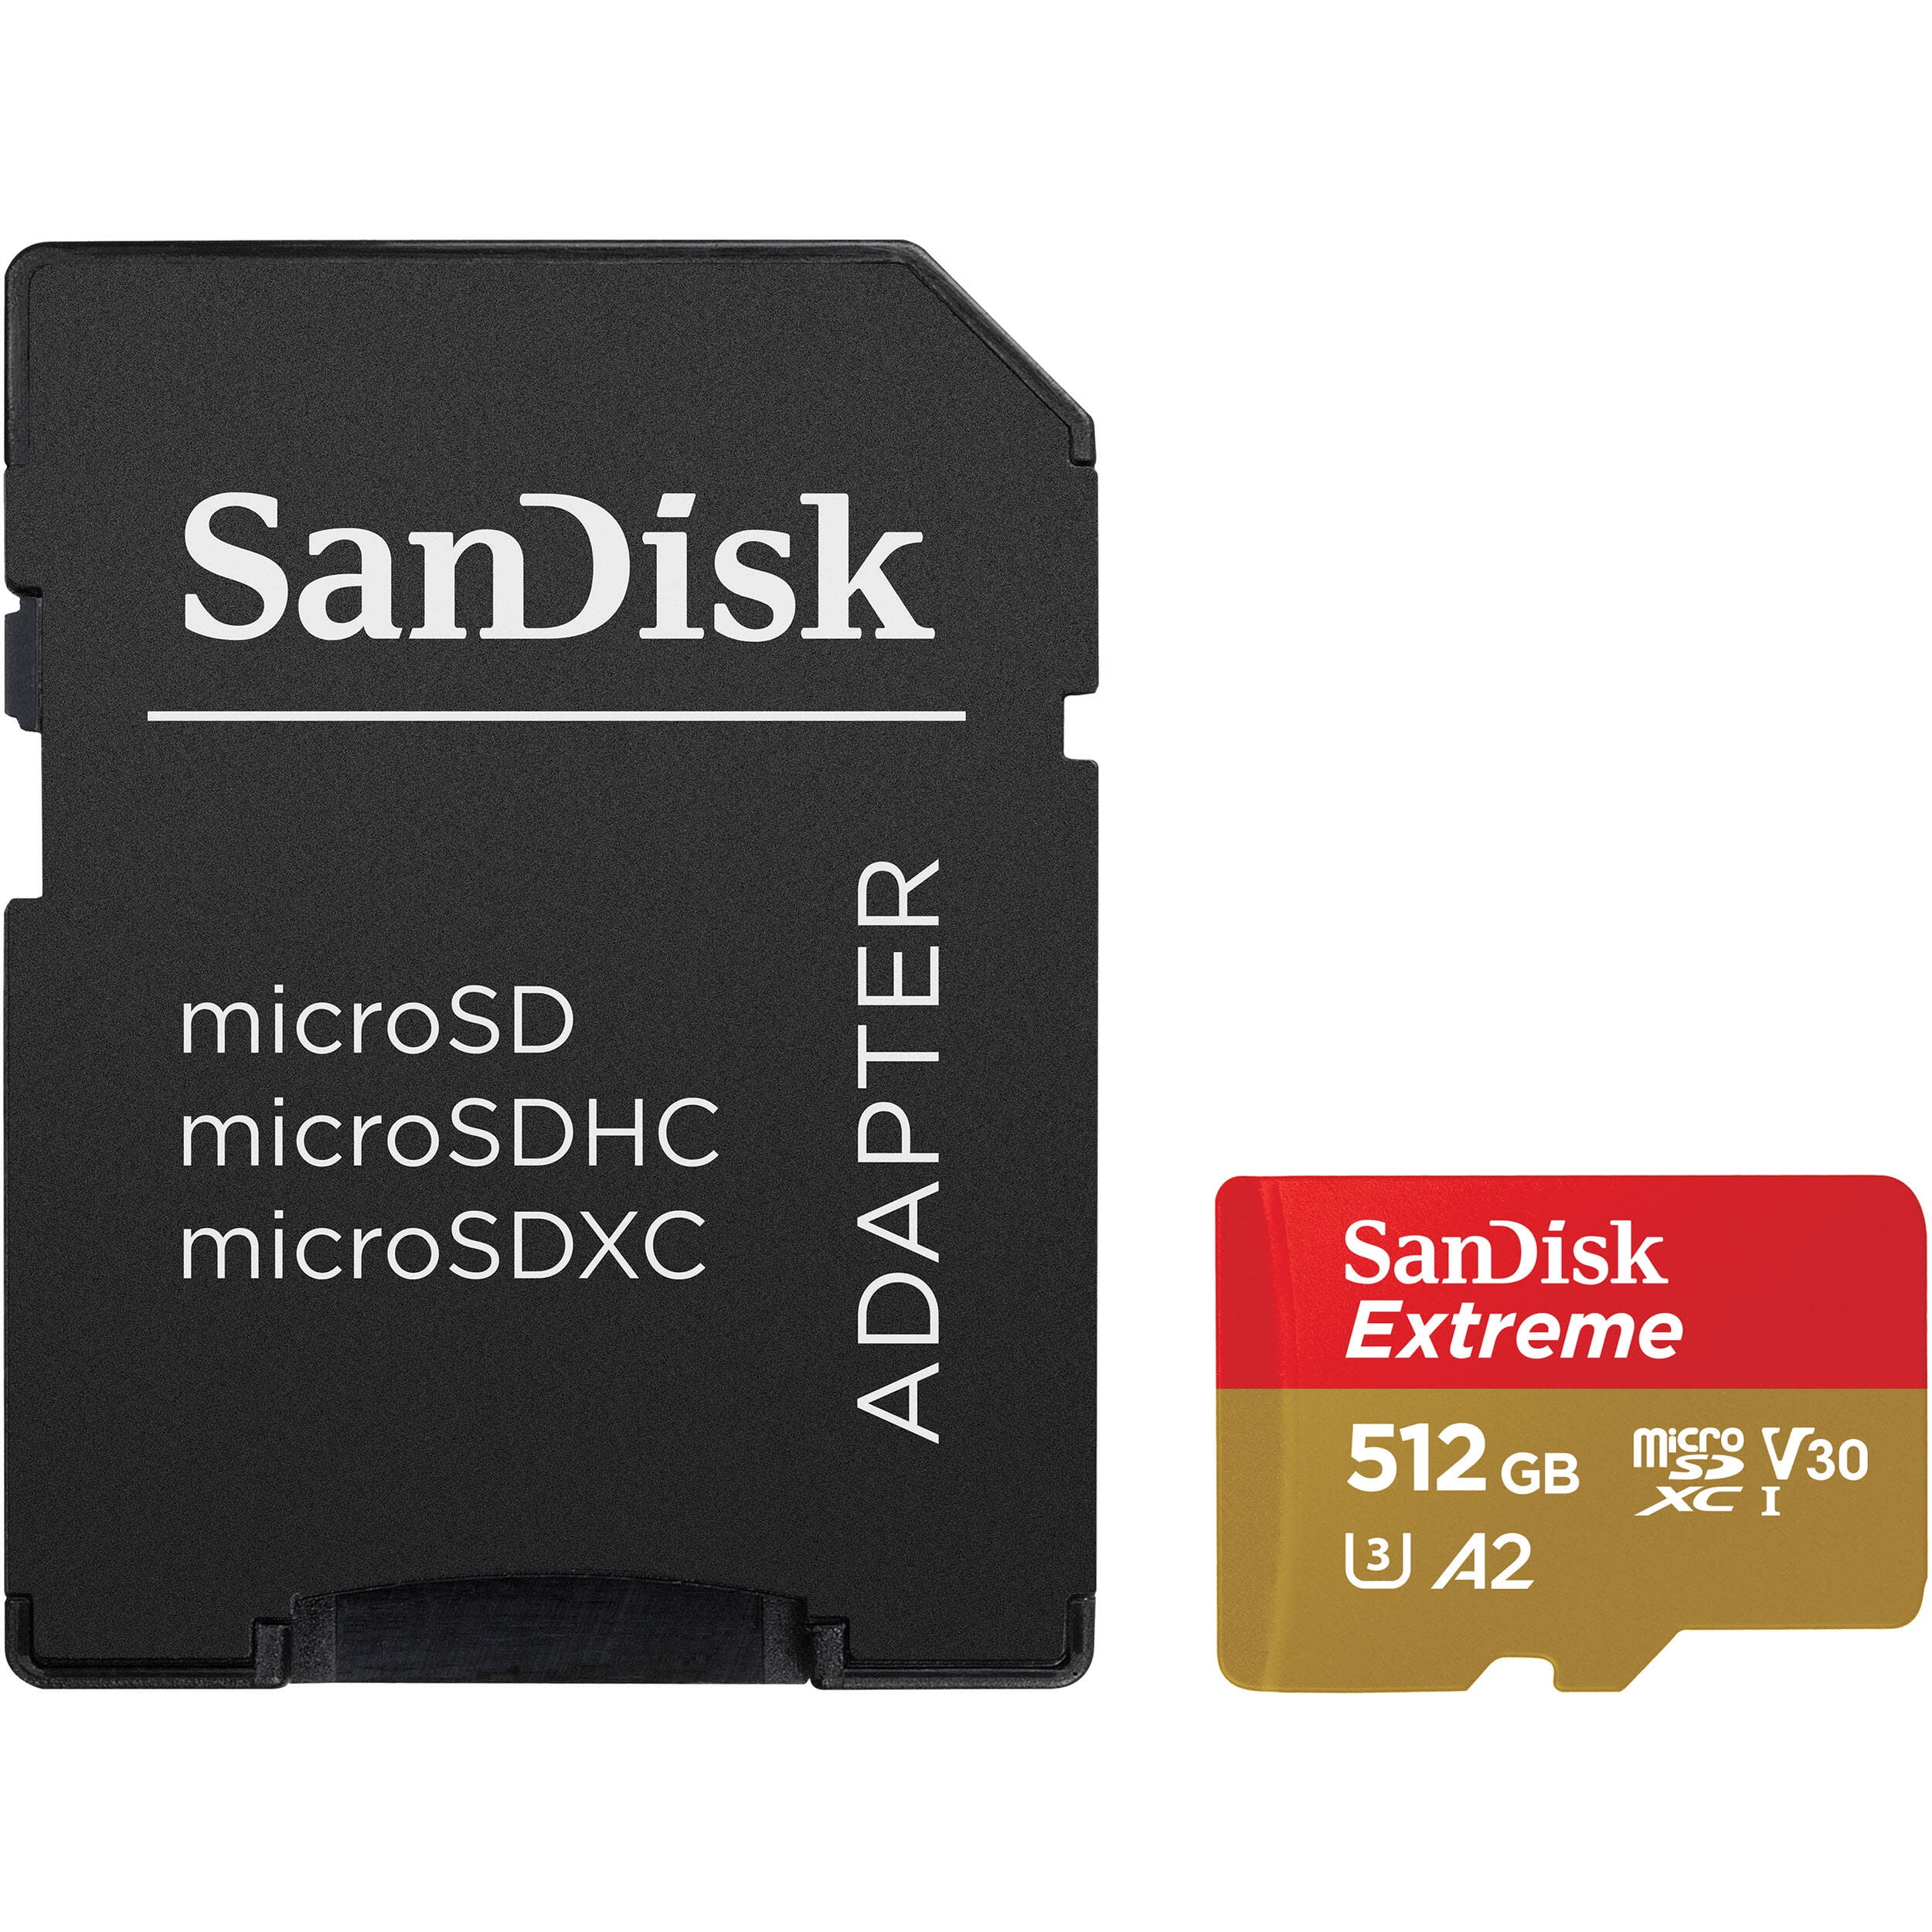 SanDisk 512GB Extreme UHS-I microSDXC Memory Card with SD Adapter, Gold/Red  